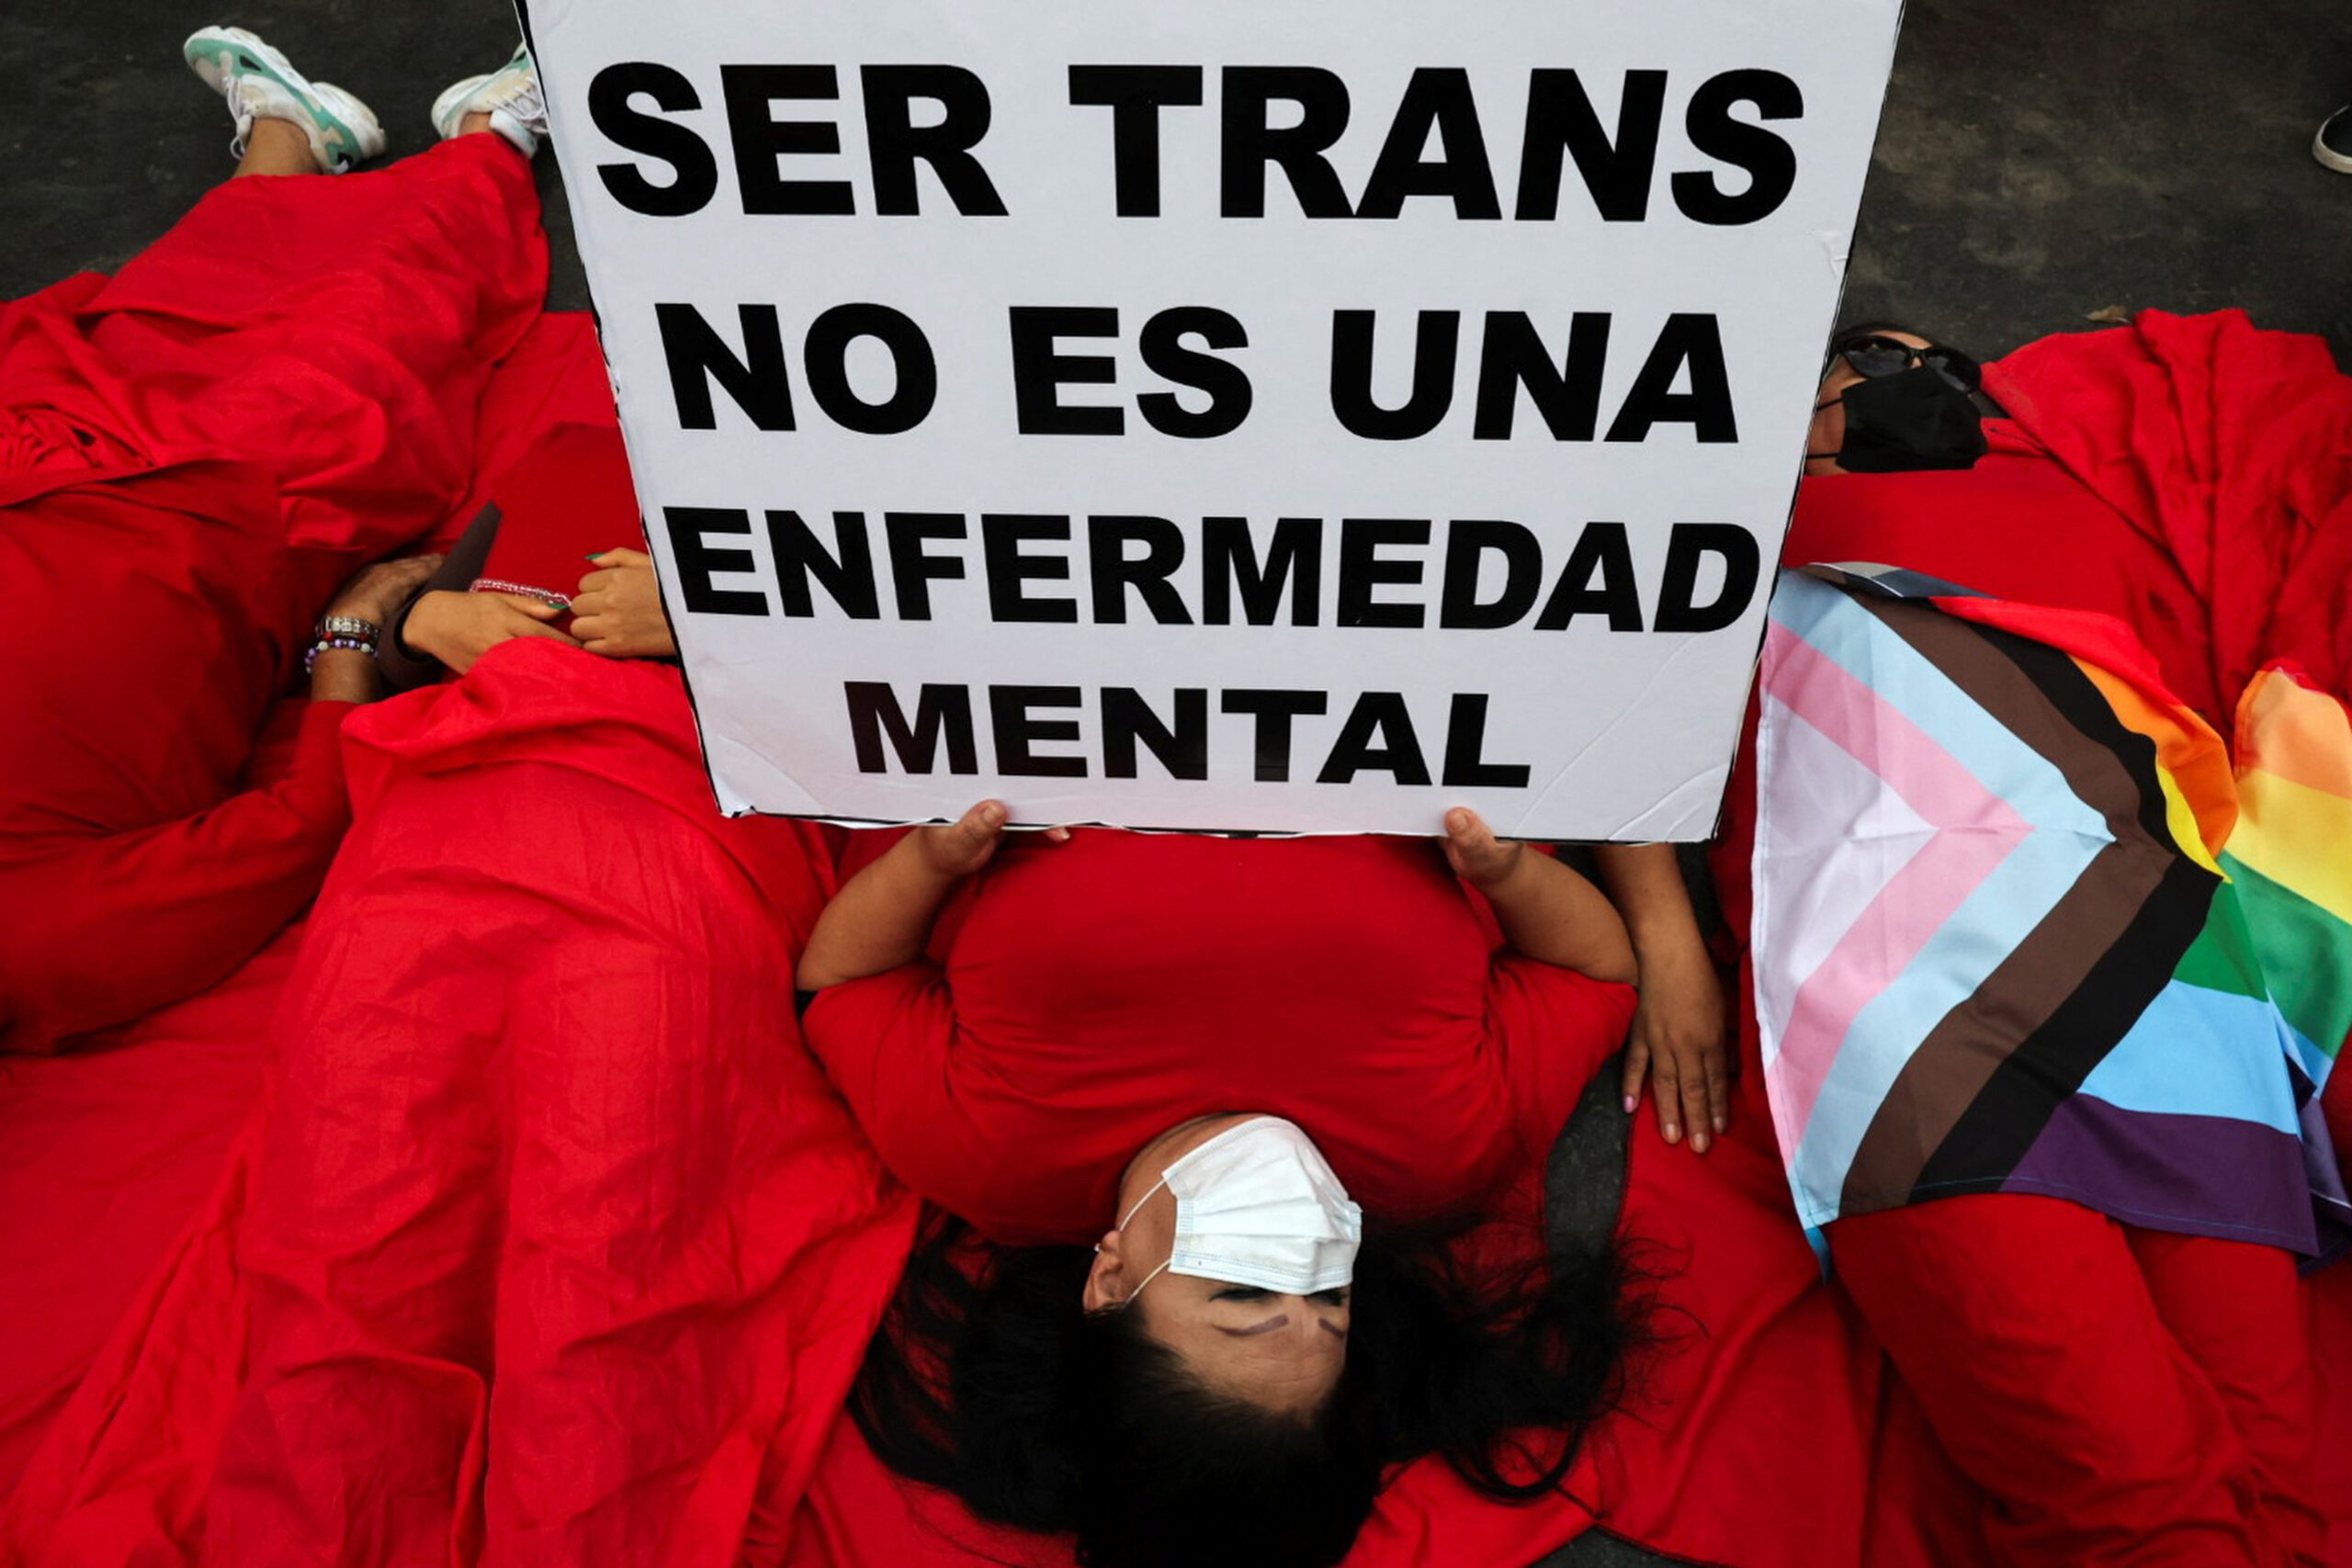 Peru protesters slam new insurance law that deems transgender people mentally ill